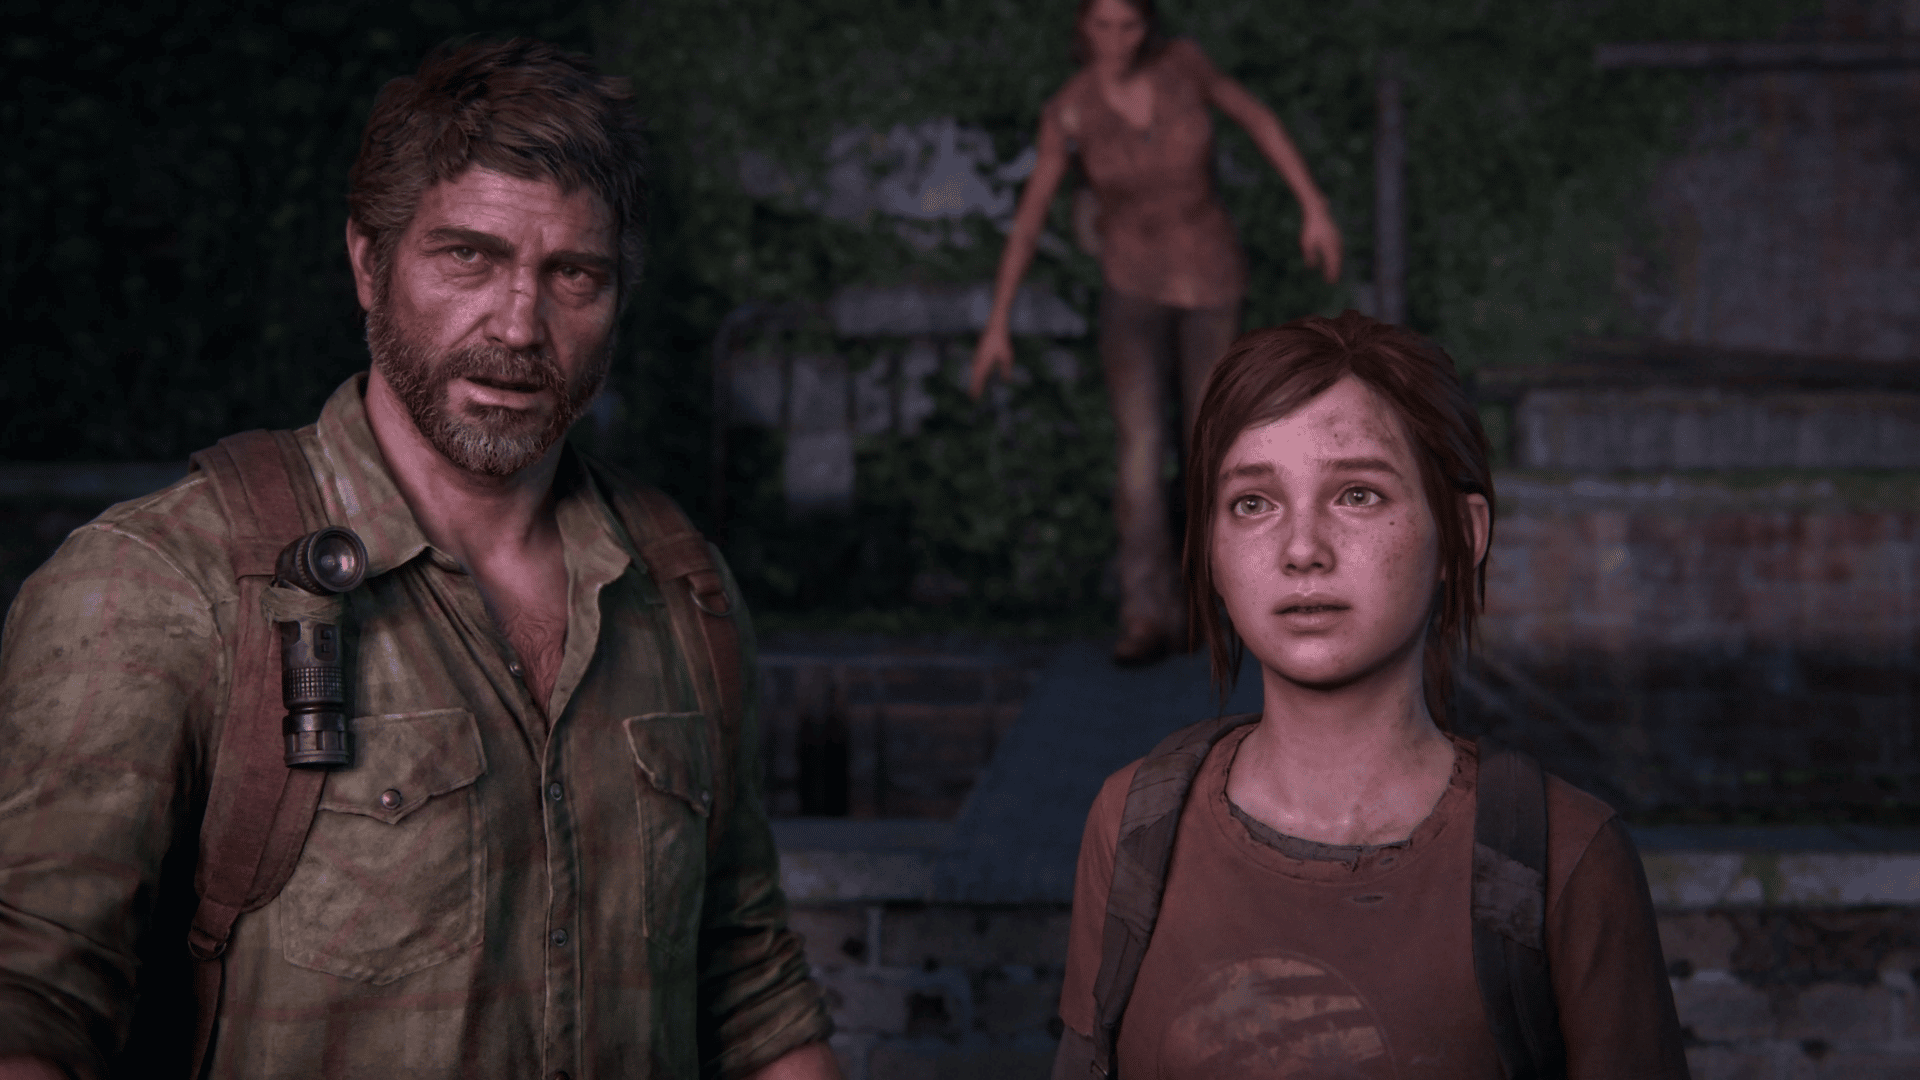 Naughty Dog Reportedly Laying Off At Least 25 Staff, Primarily Quality Assurance Testing, & Not Offering Severance